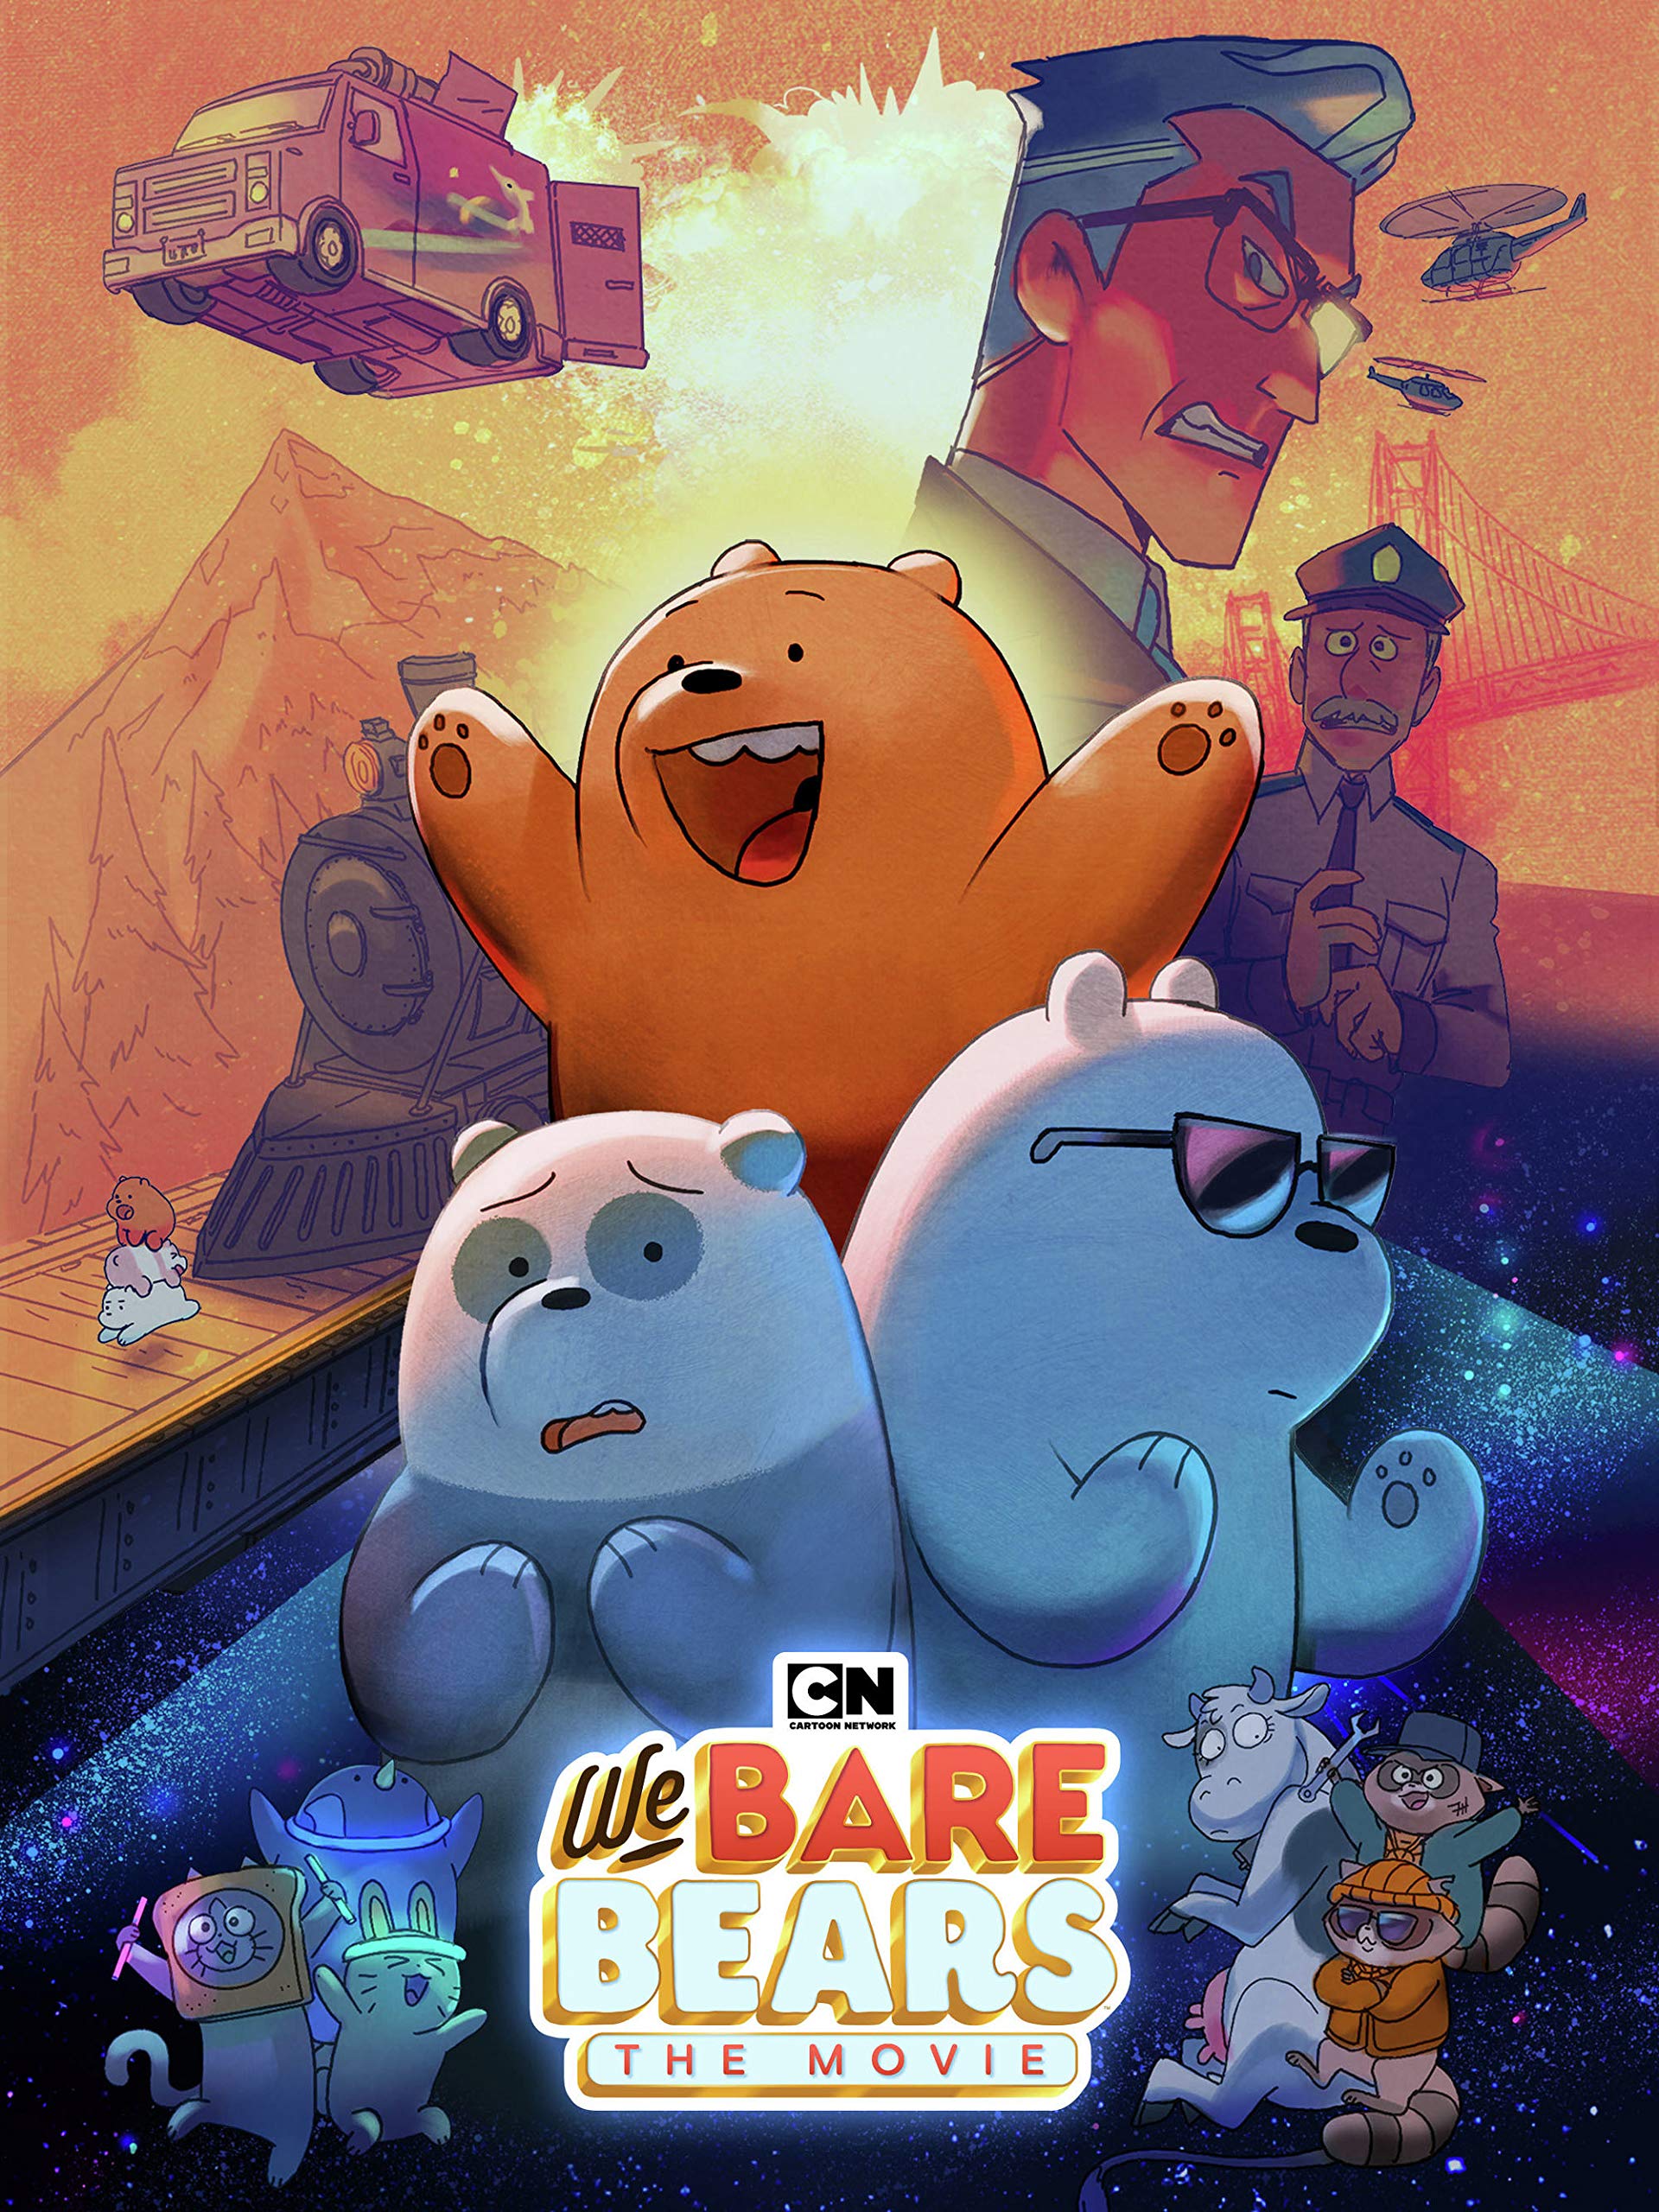 We Bare Bears: The Movie Non-Spoiler Review